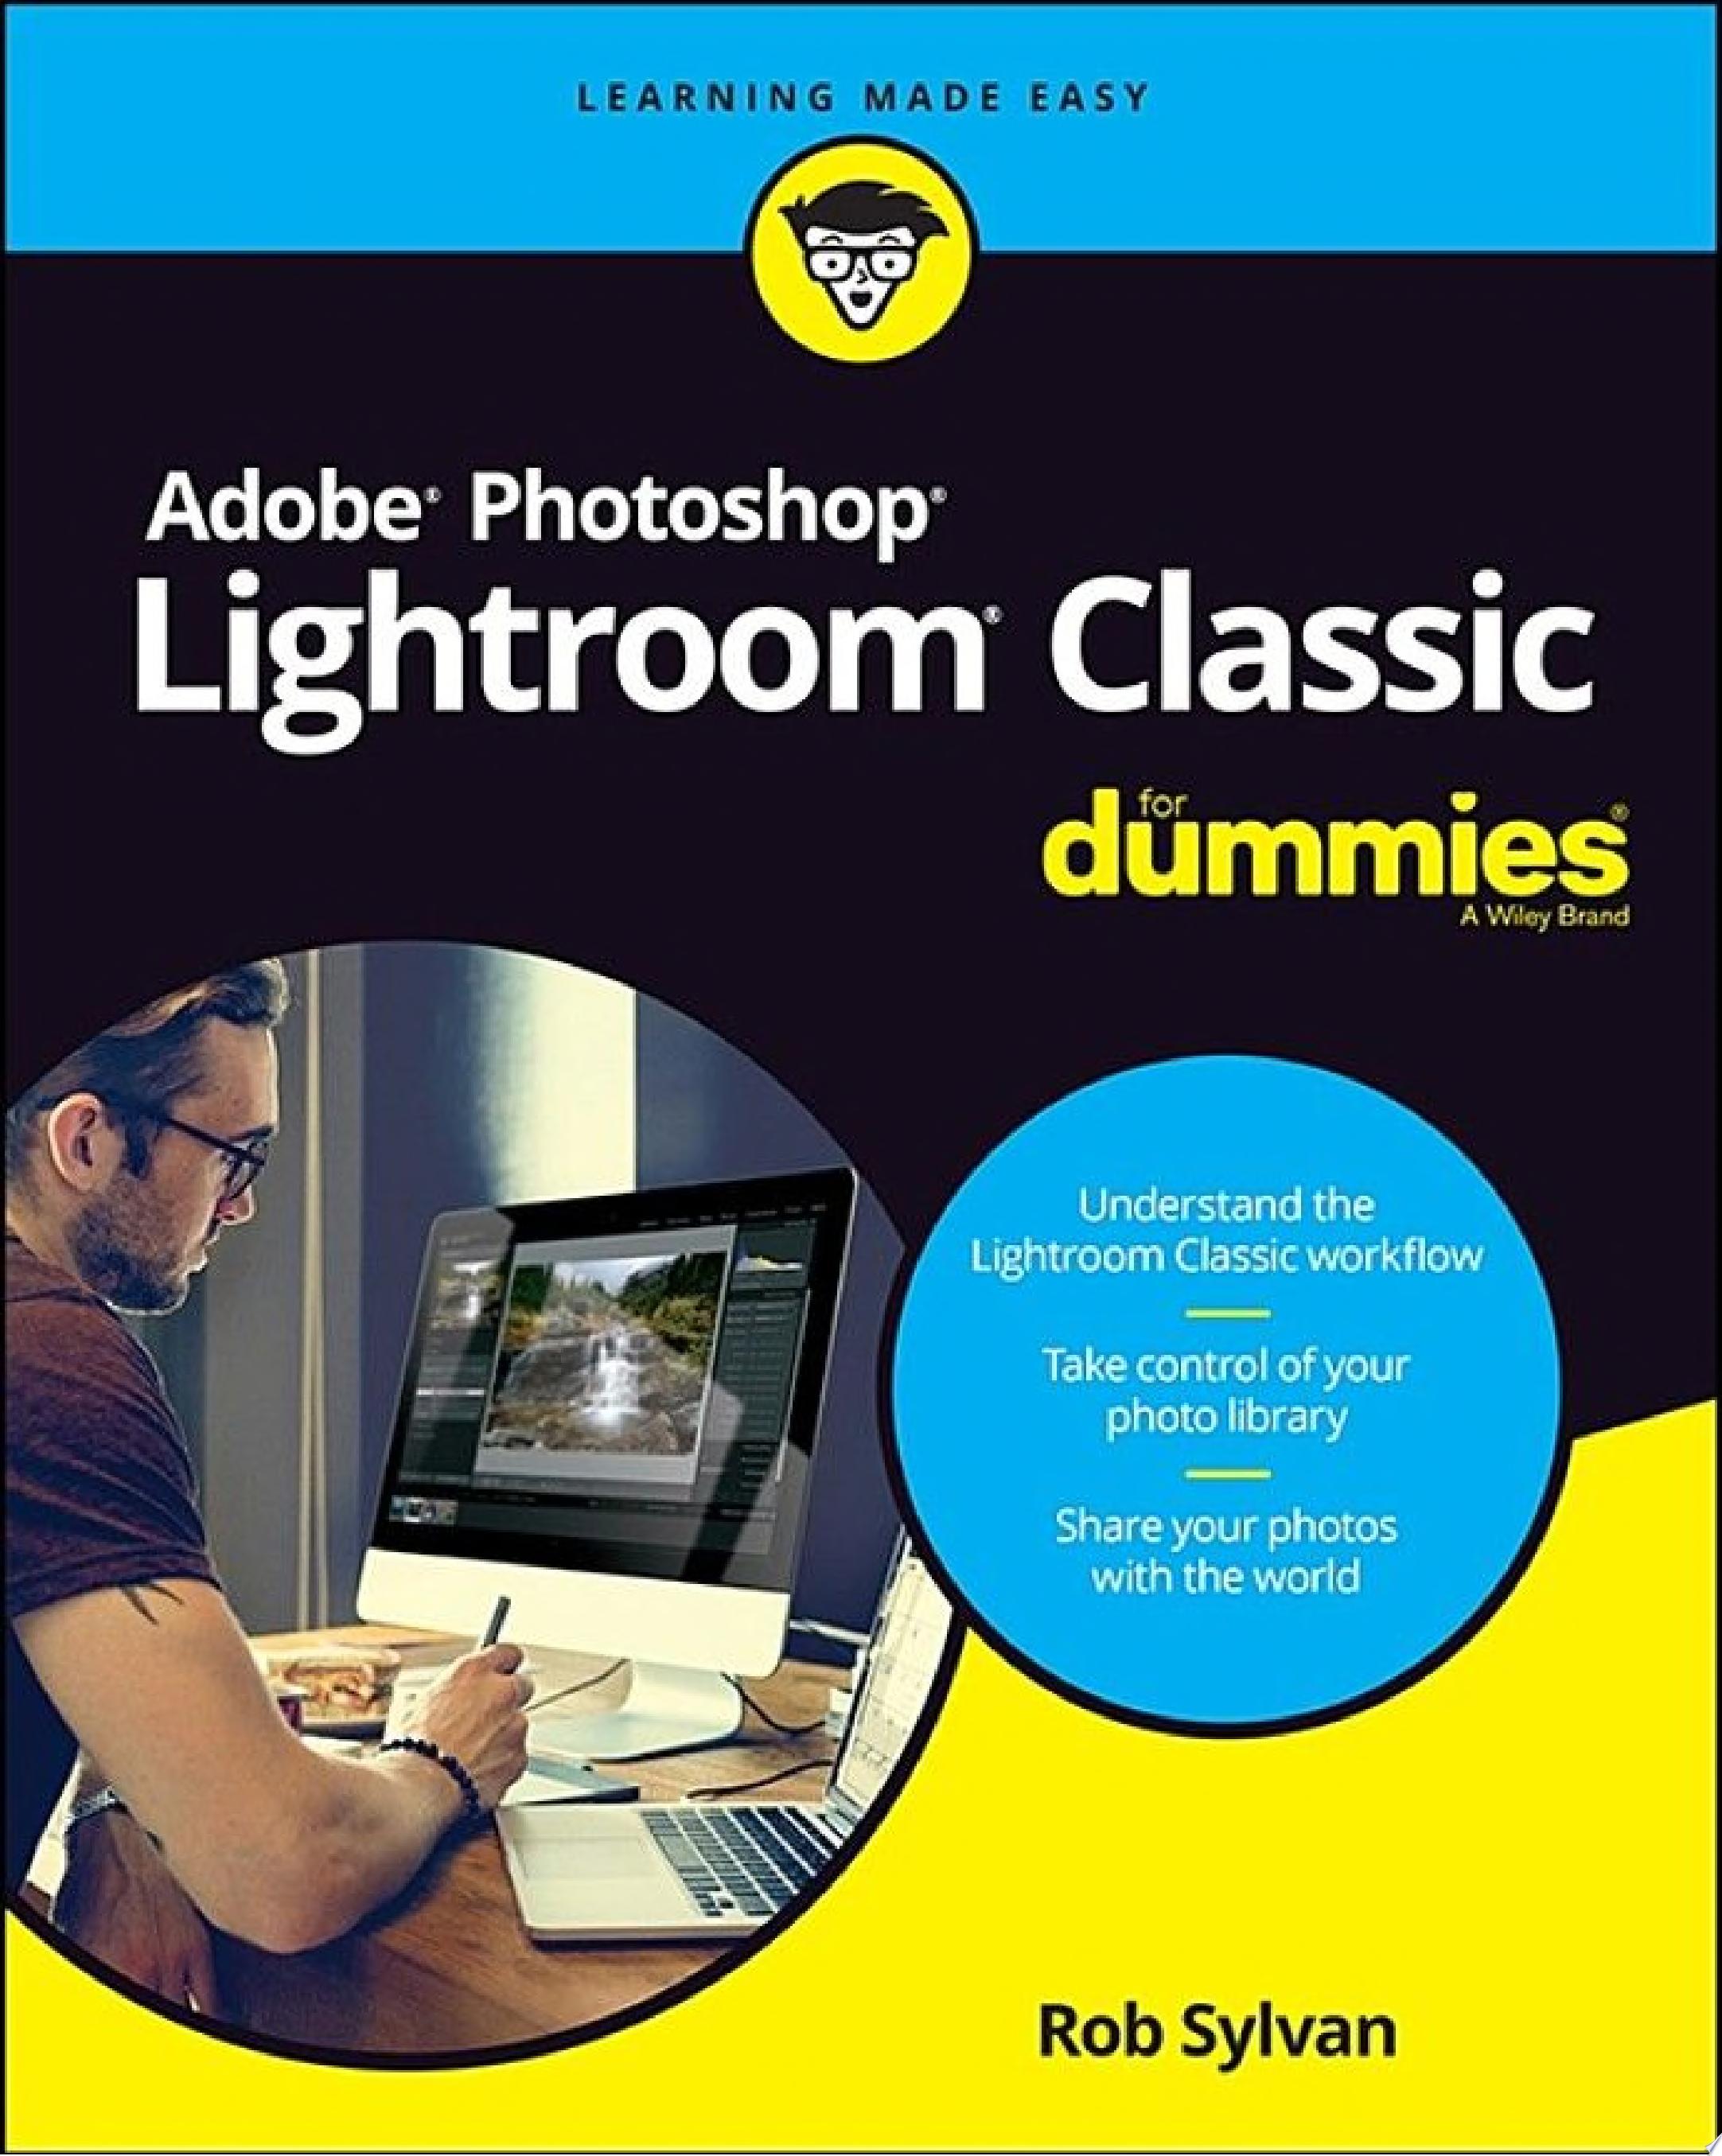 Image for "Adobe Photoshop Lightroom Classic For Dummies"